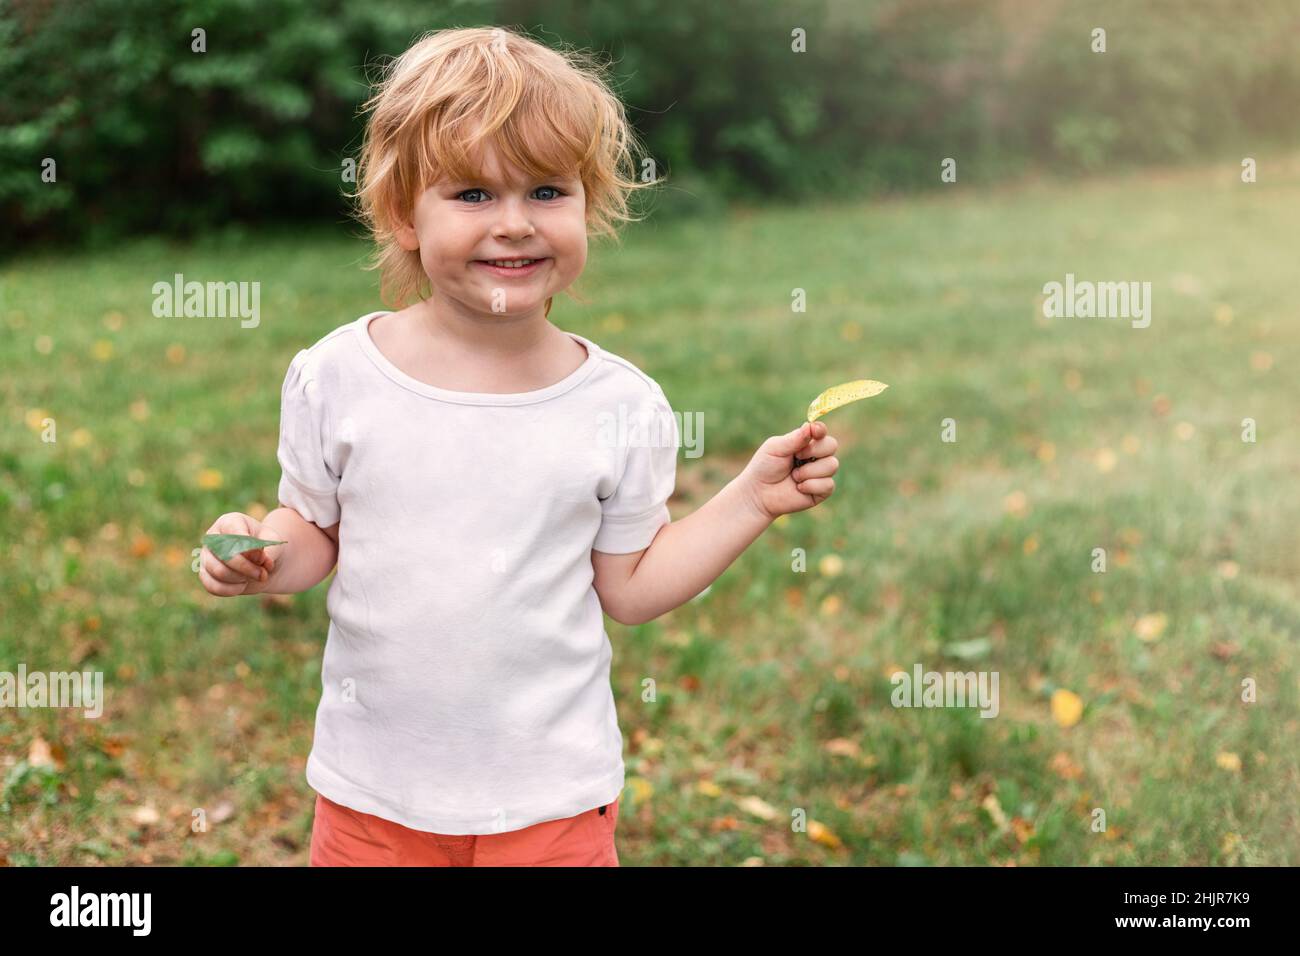 Small happy child playing outdoors in summer. Smiling girl in park on sunny day. Playful little kid portrait playing at nature with leaves Stock Photo